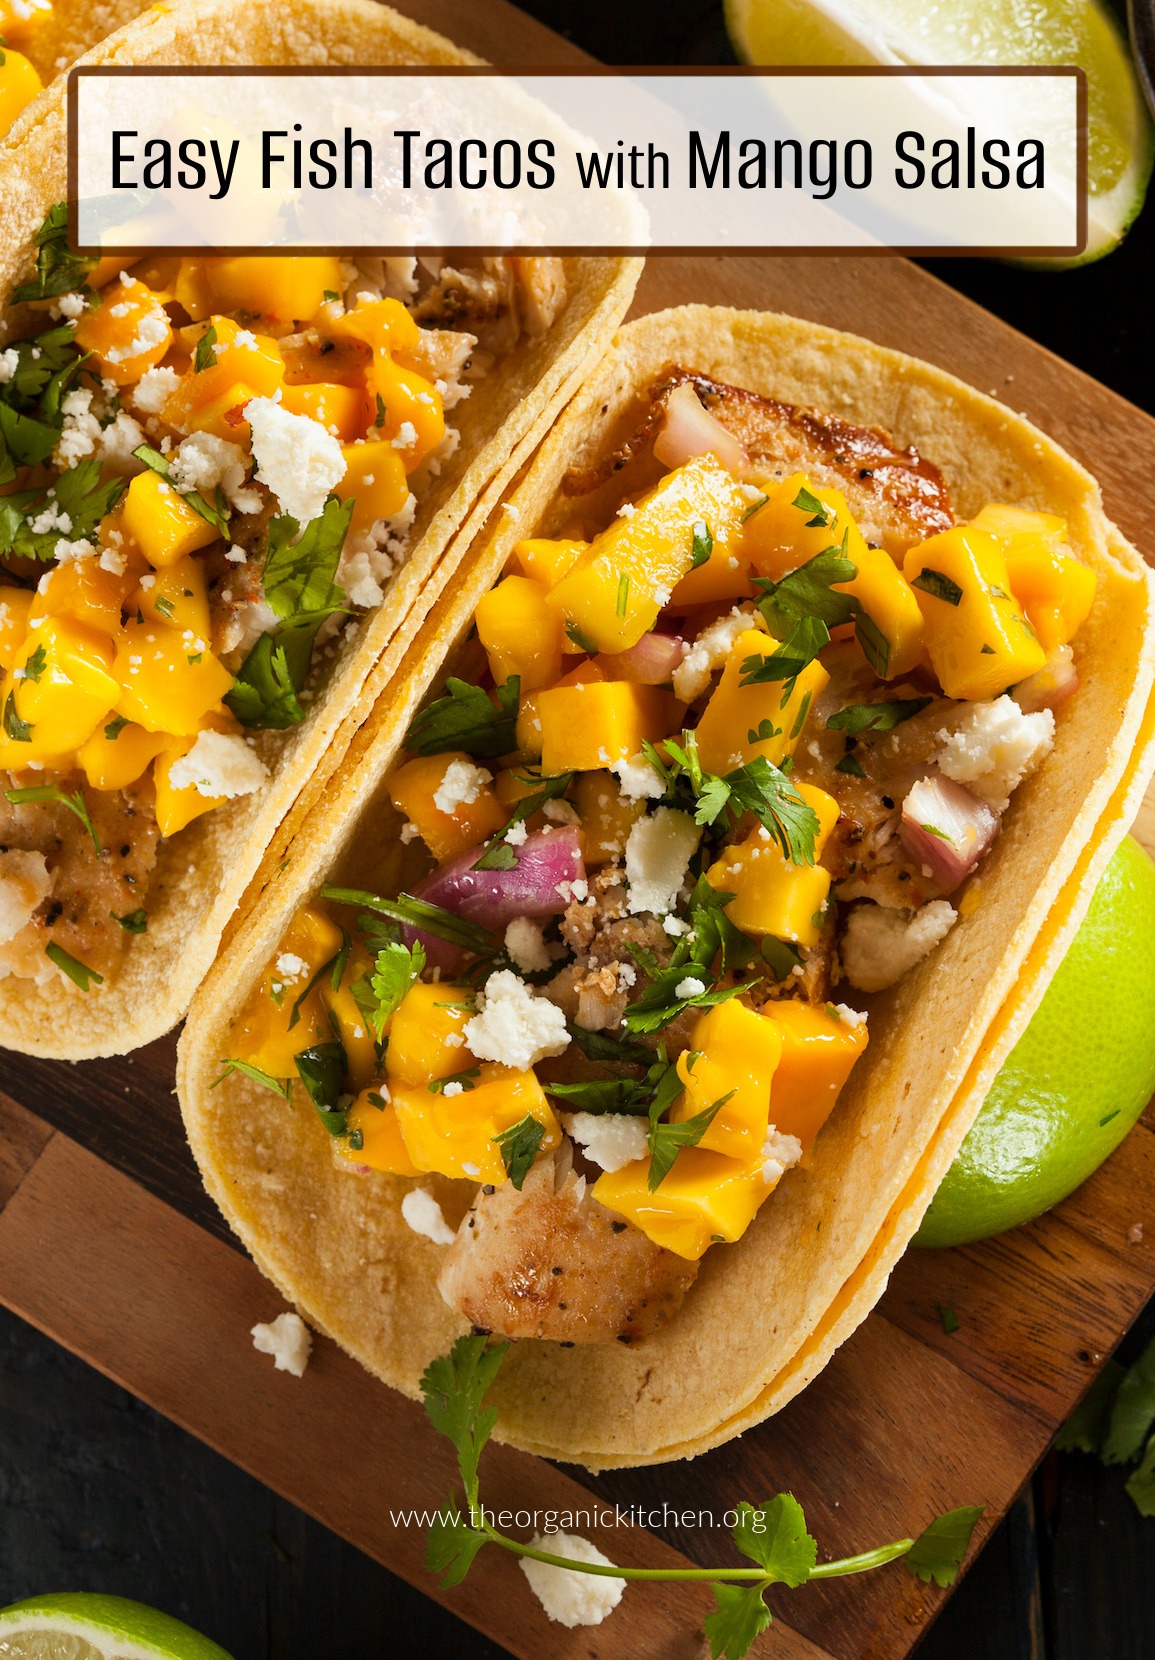 Easy Fish Tacos with Mango Salsa garnished with cilantro and lime wedges on wood cutting board